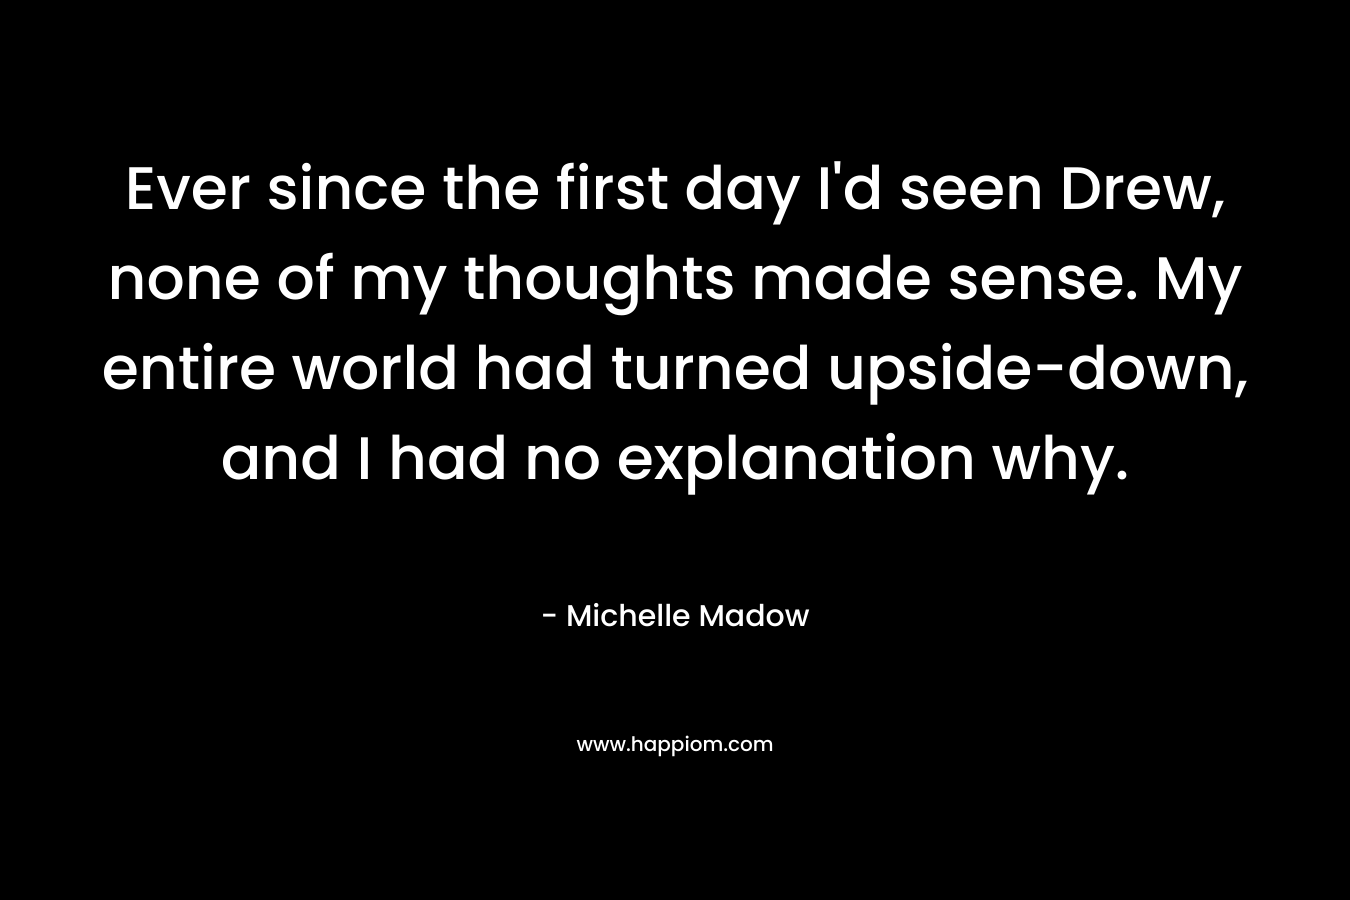 Ever since the first day I’d seen Drew, none of my thoughts made sense. My entire world had turned upside-down, and I had no explanation why. – Michelle Madow